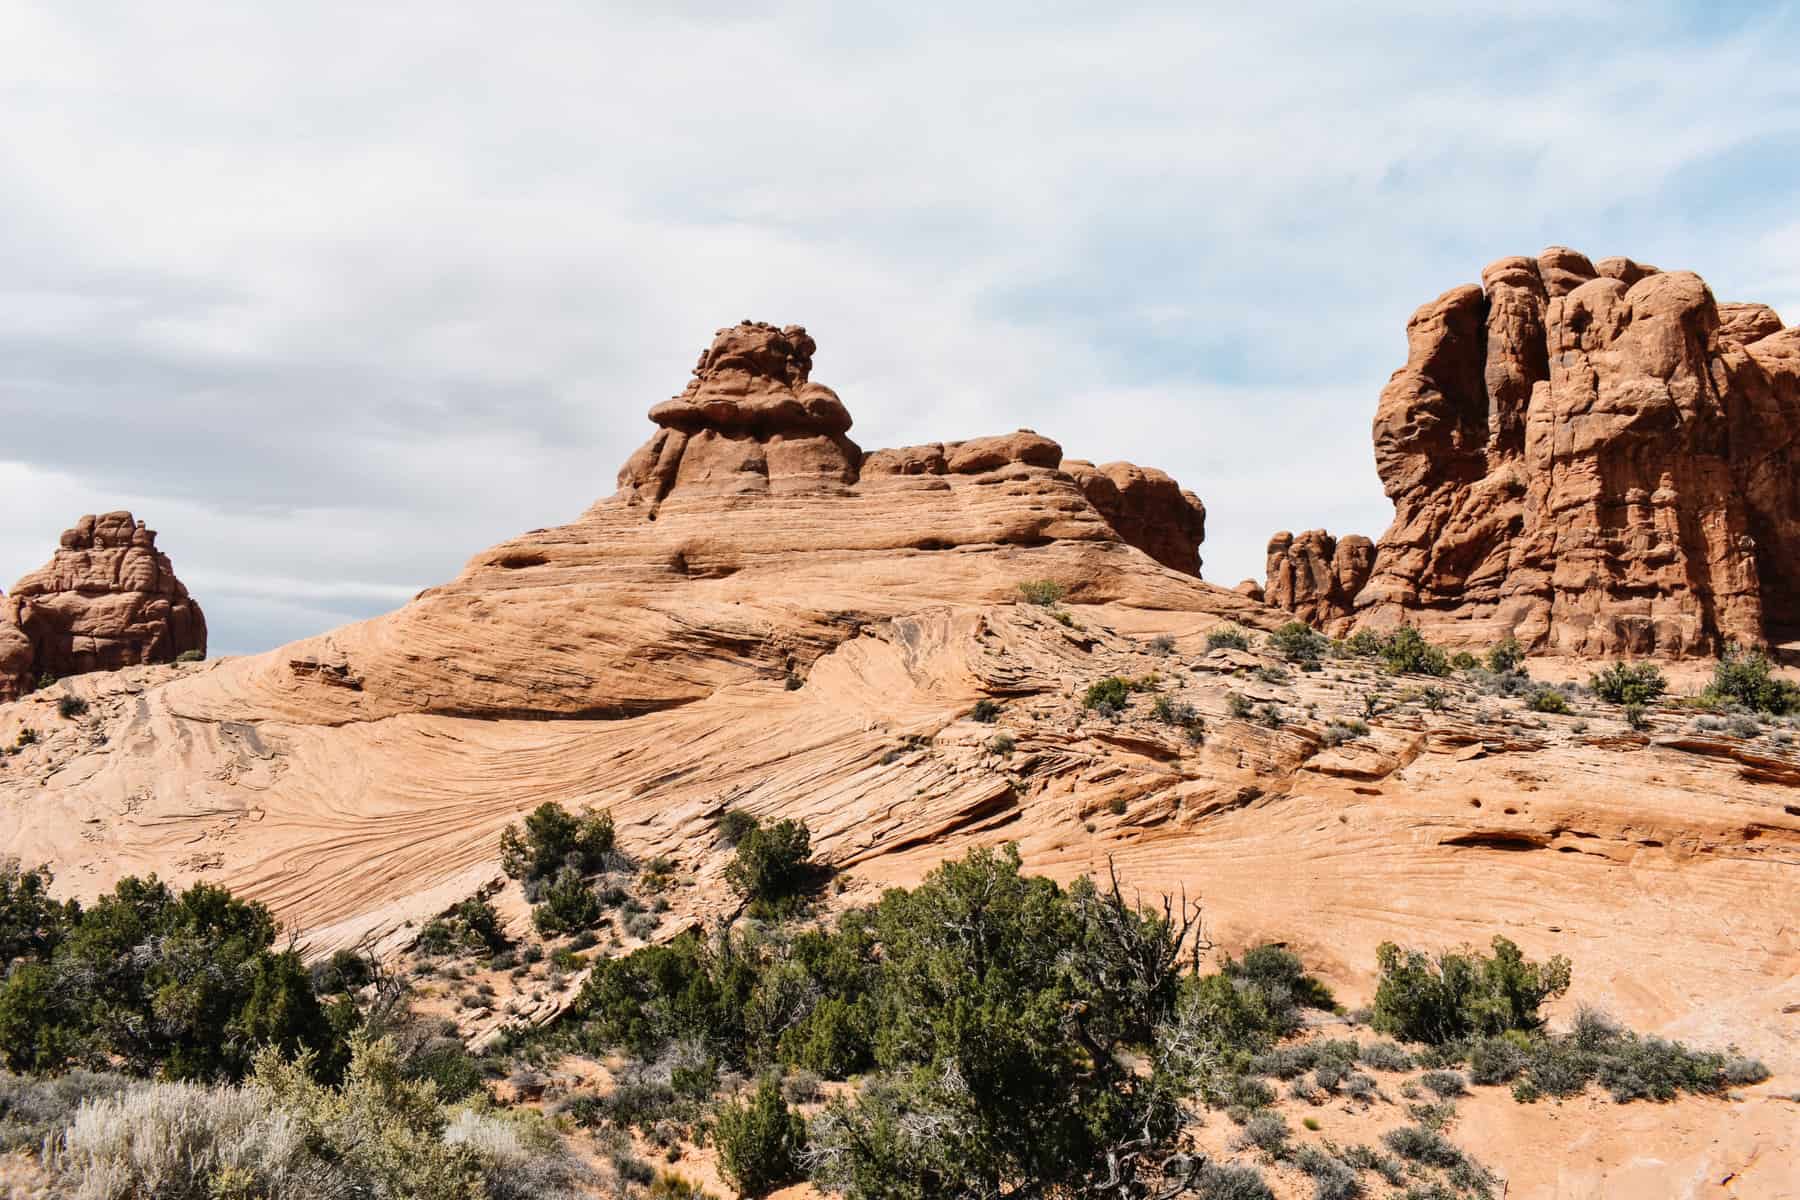 Some of the red rock formations at Arches National Park.